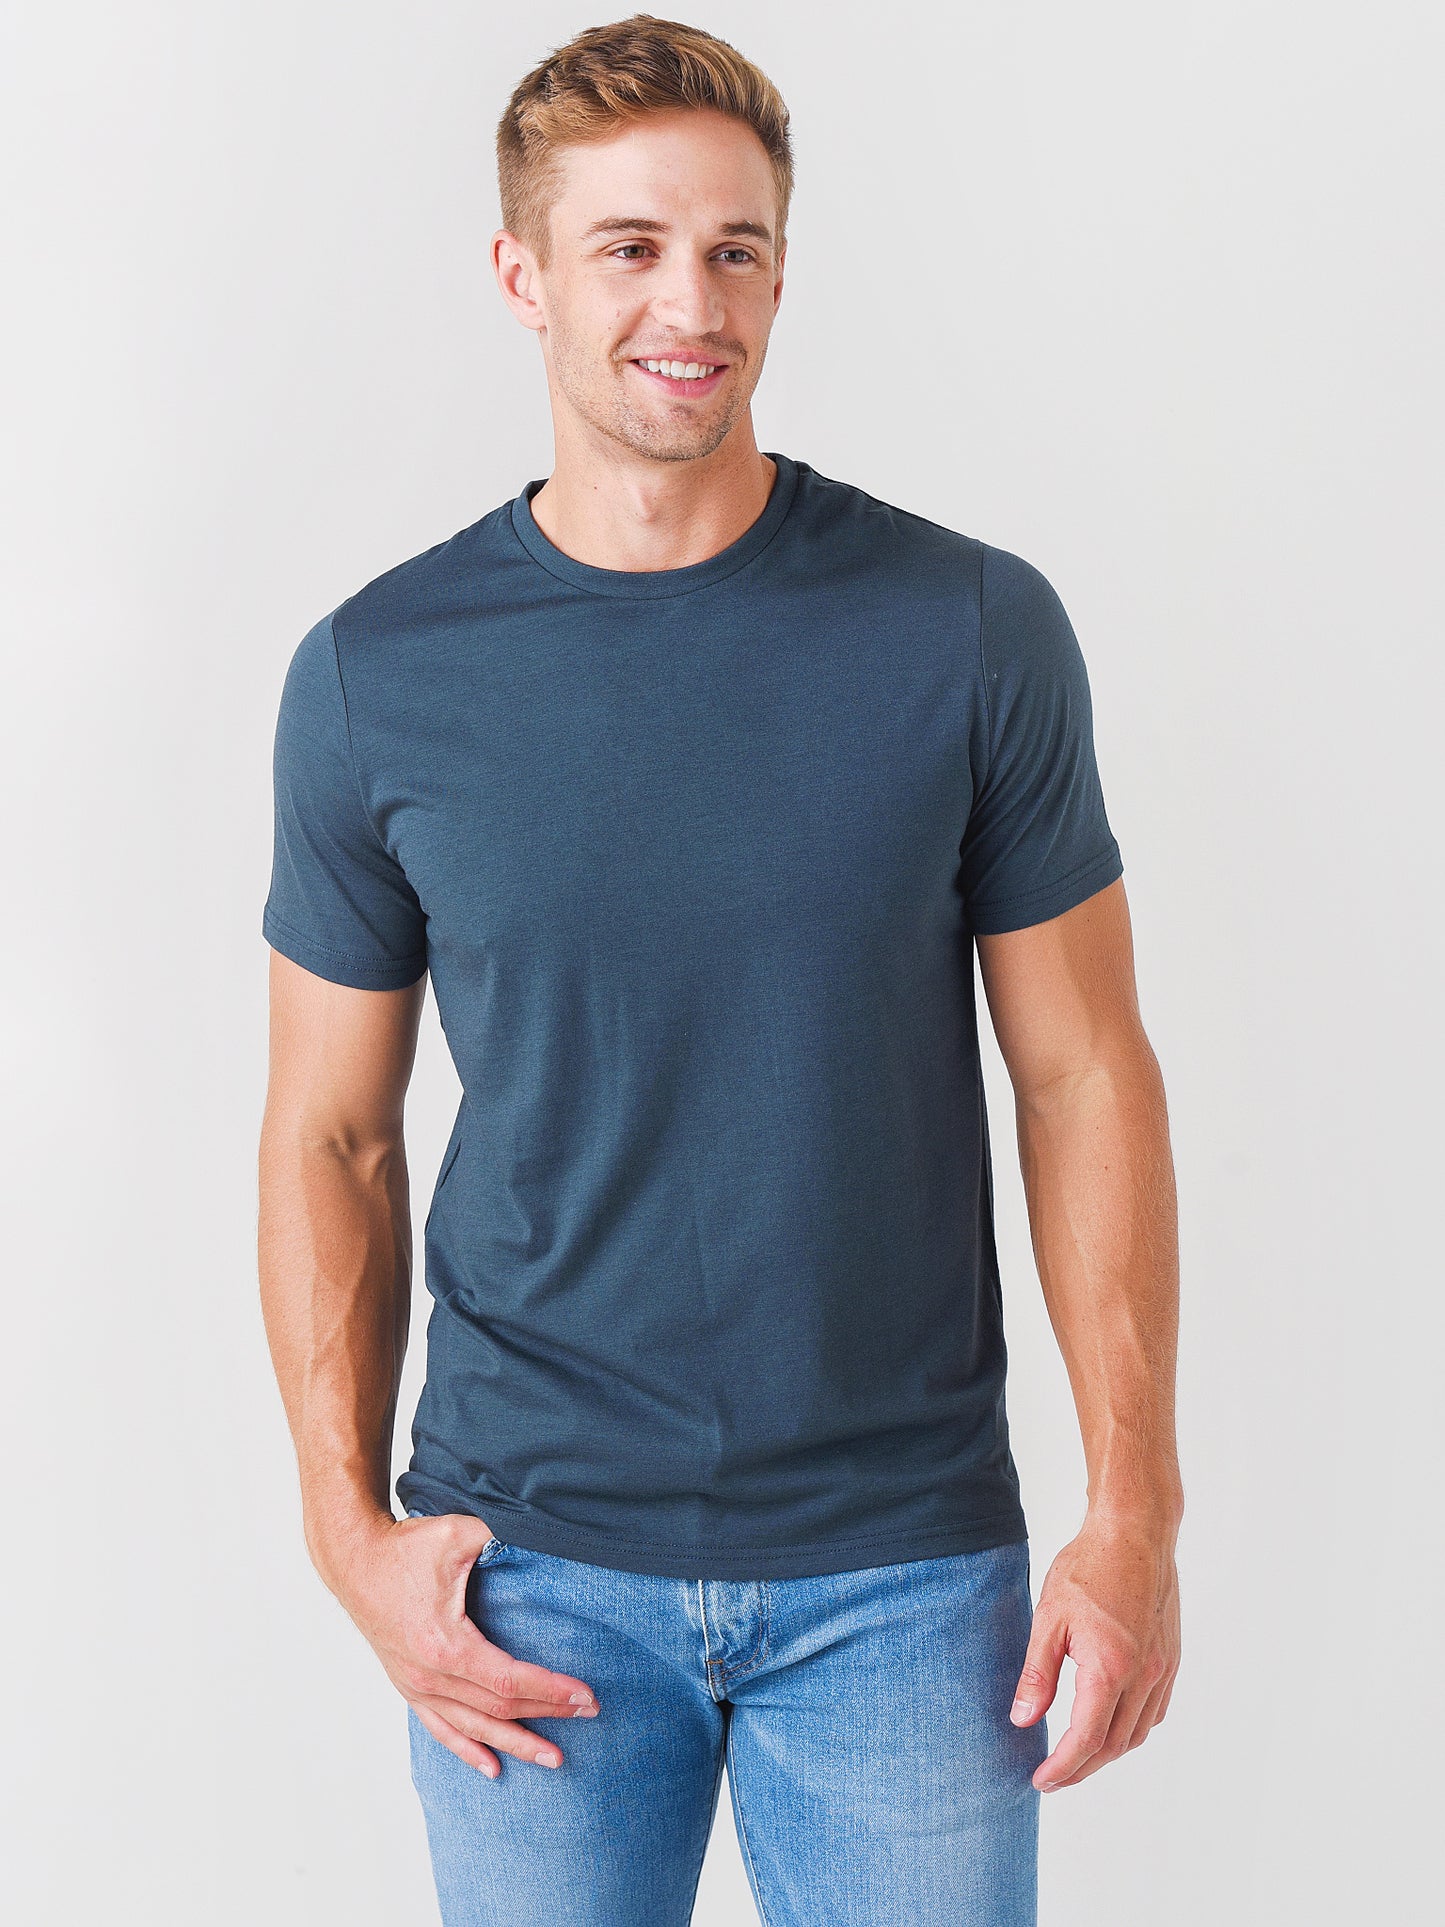 Free Fly Men's Bamboo Heritage Tee